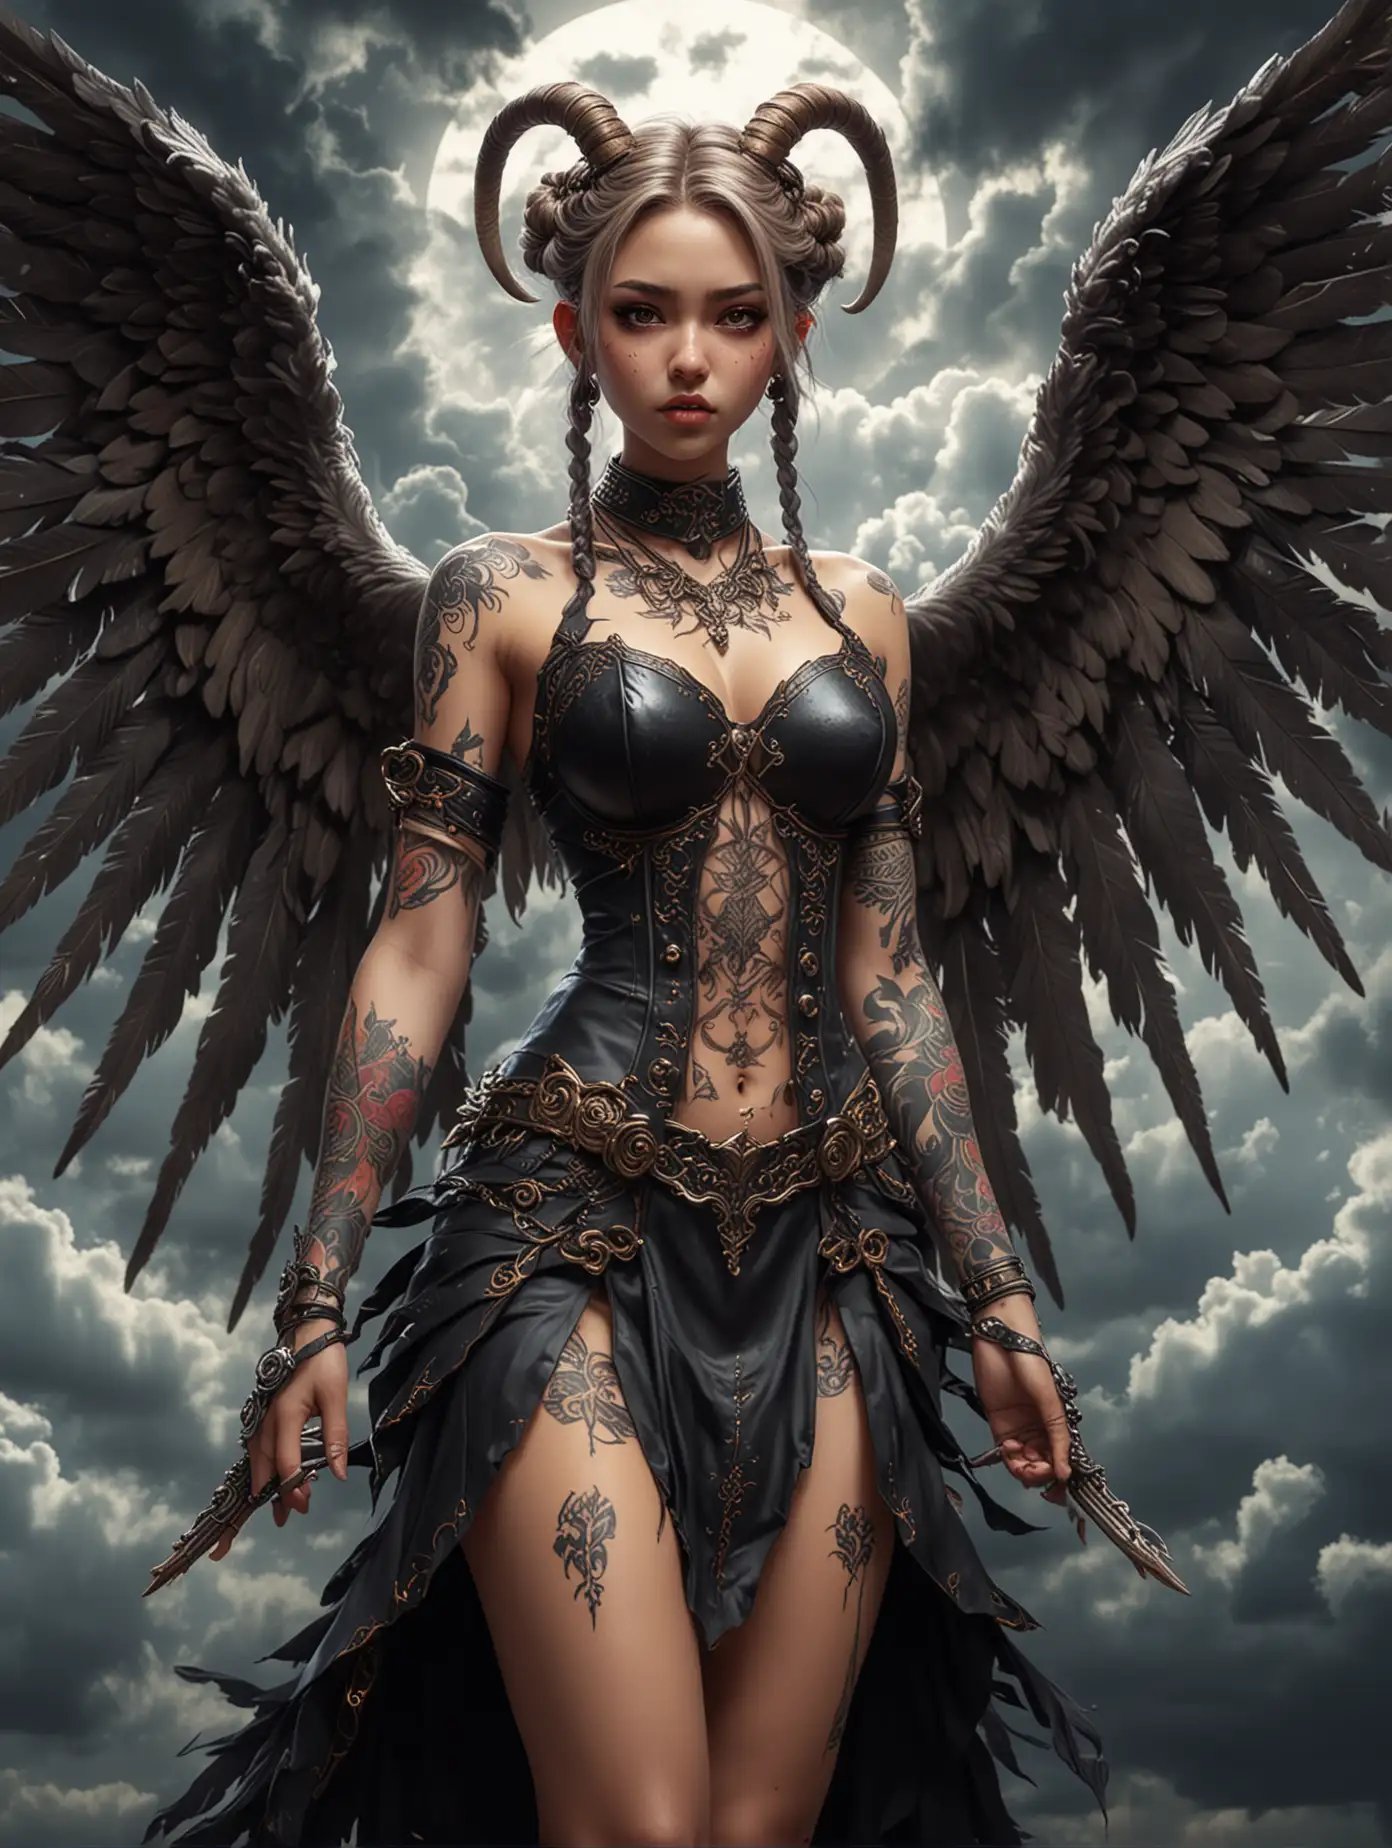 Seductive-Anime-Angel-with-Insane-Wings-and-Tattoos-in-Moody-Atmosphere